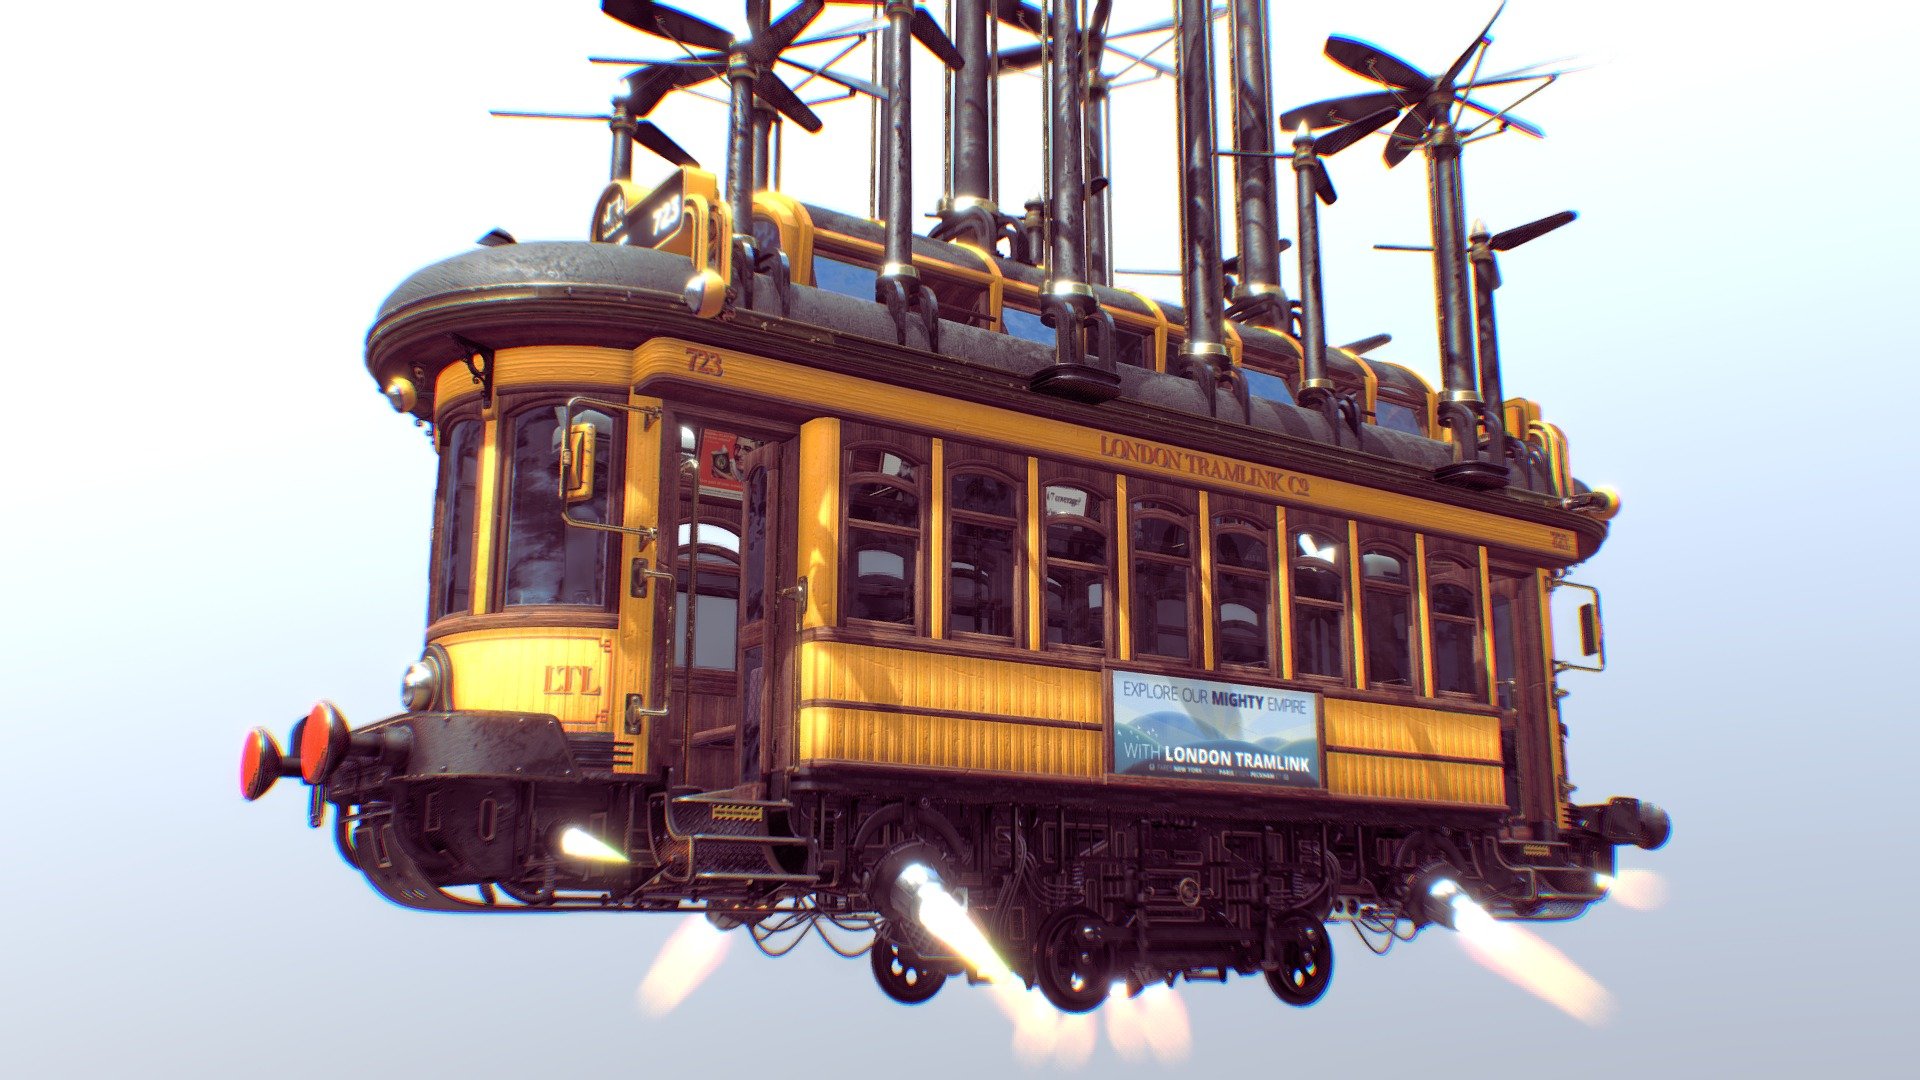 The London Tramlink is a flying tram operated somewhere in an alternate history by the fictitious London Tramlink Company (known by locals as LTL for short).

It was modelled in Blender 3.2.1, and textured in Substance Painter/Photoshop.

If you purchase this model then please send me a message to tell me about your project, I'd love to see what you create with it! - London Tramlink - Buy Royalty Free 3D model by se7en23 3d model